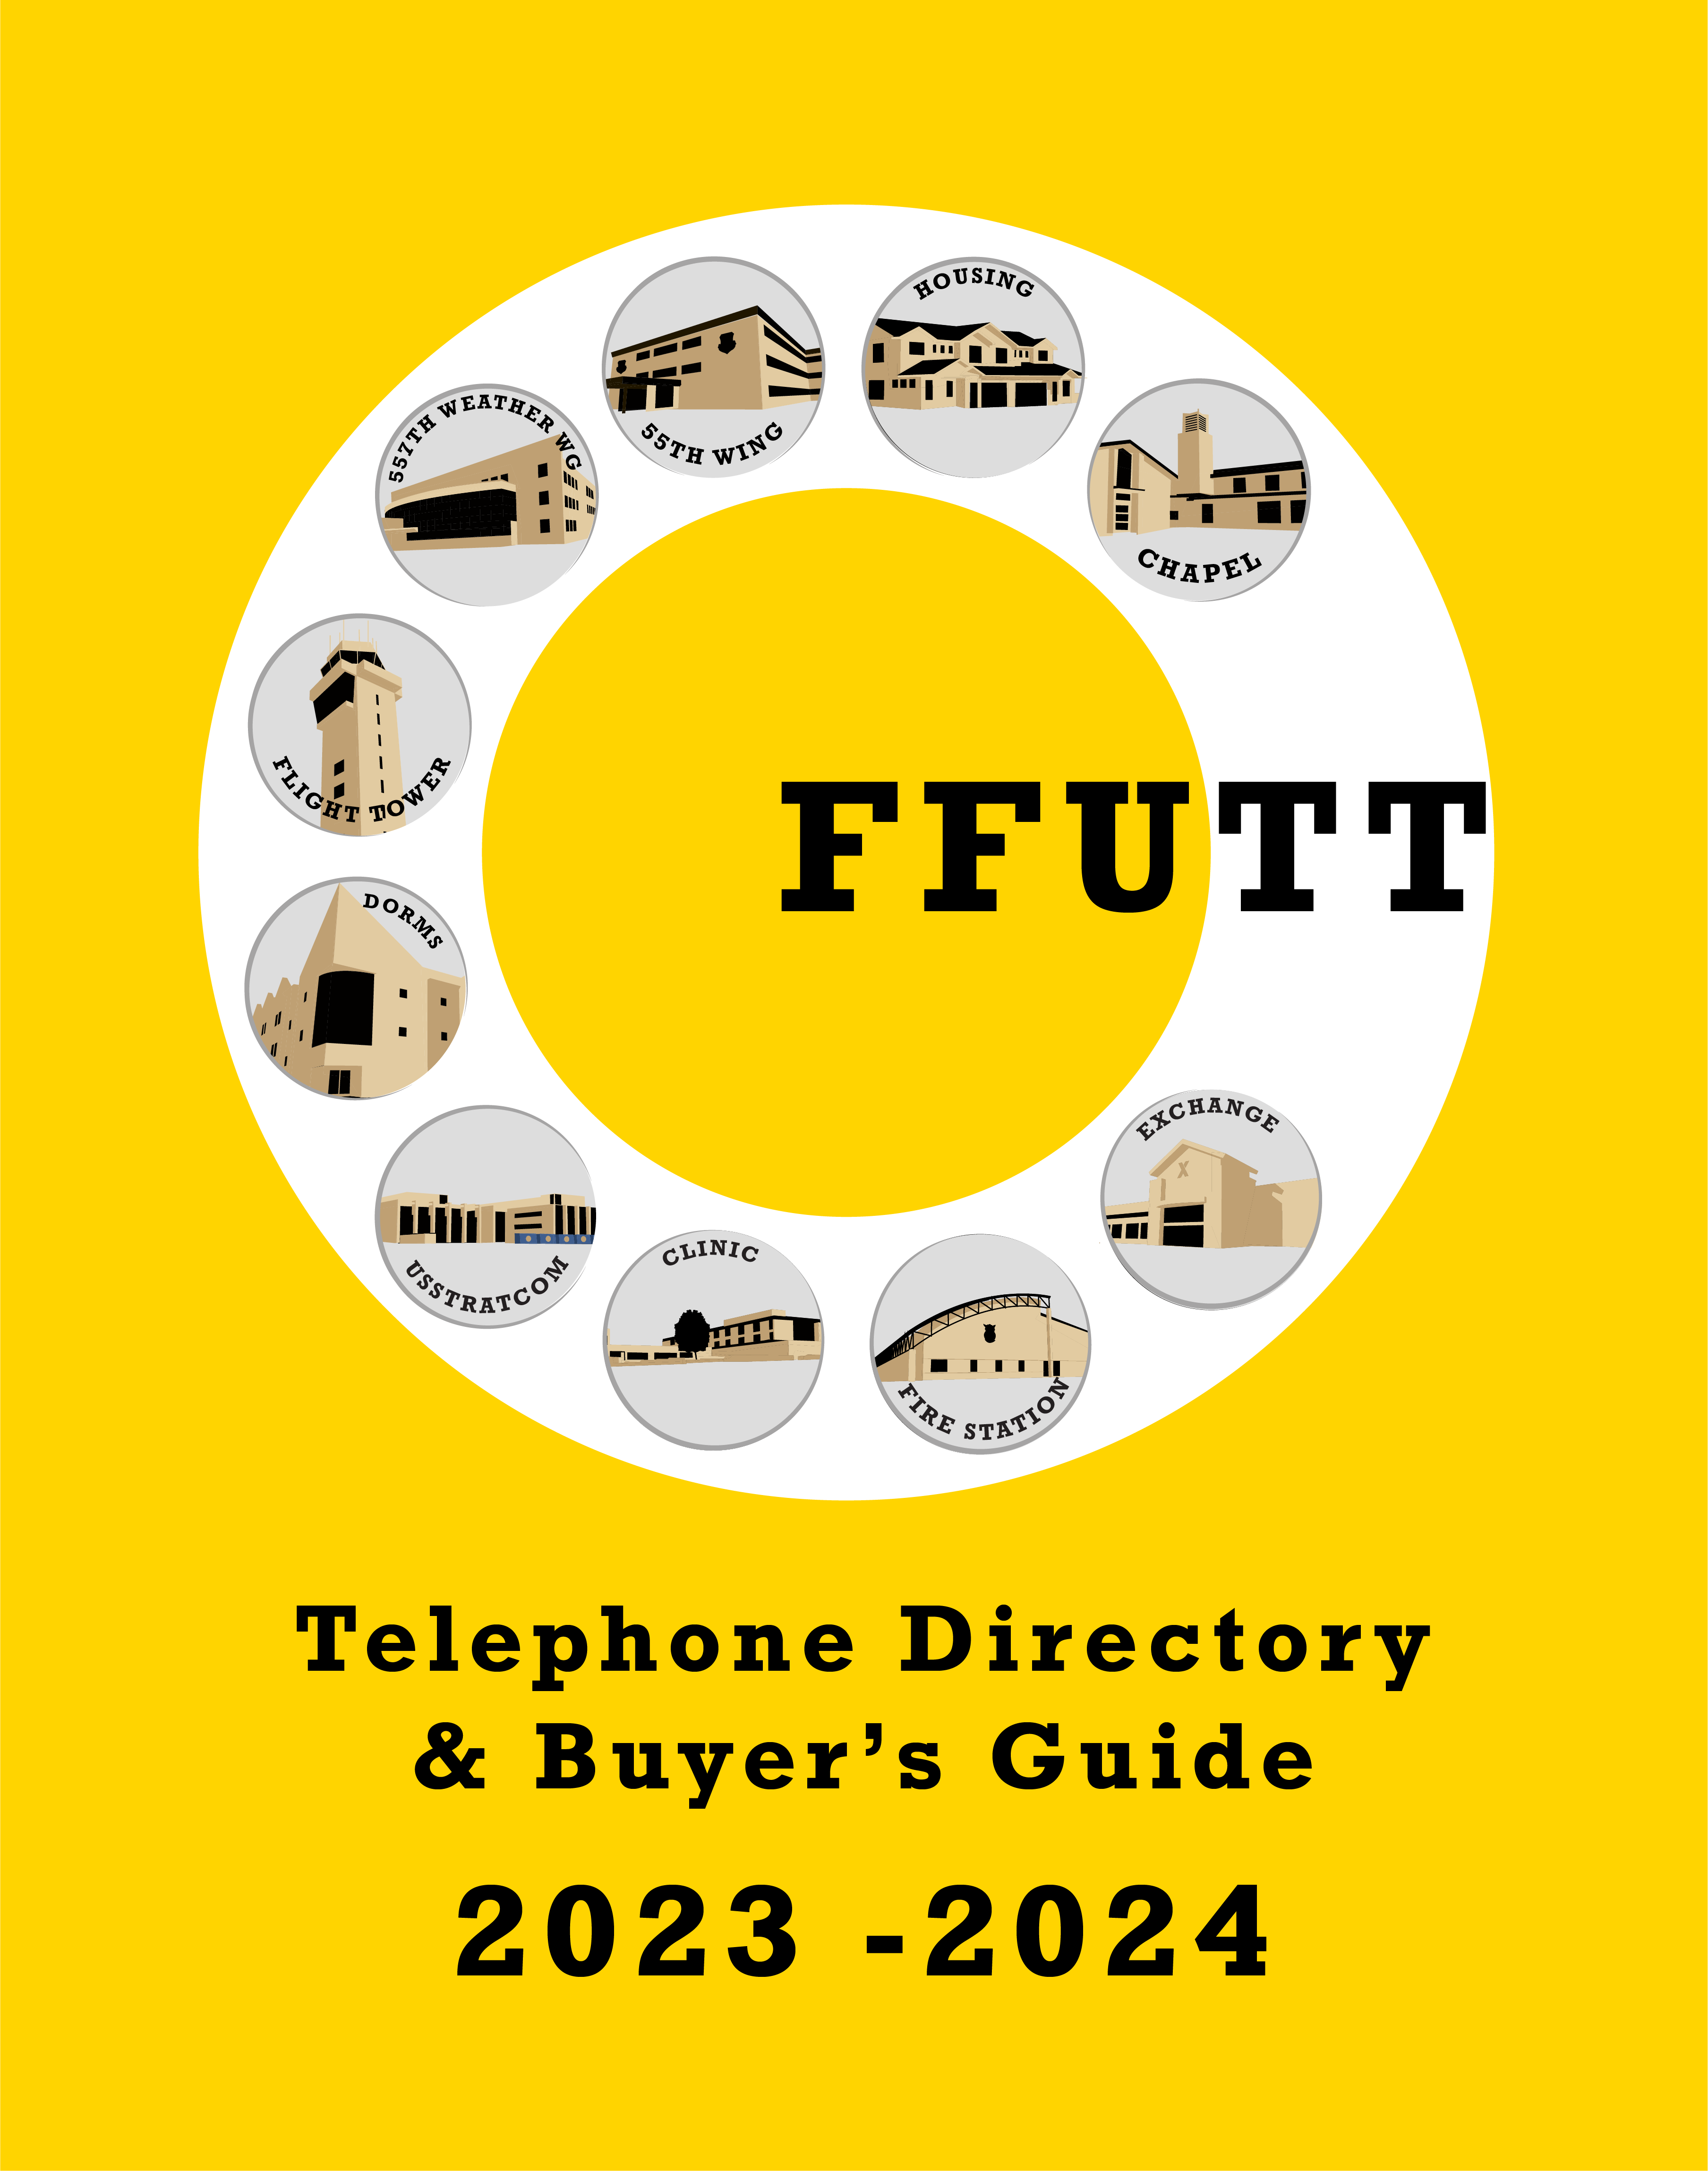 Offutt phone directory cover 2023-24